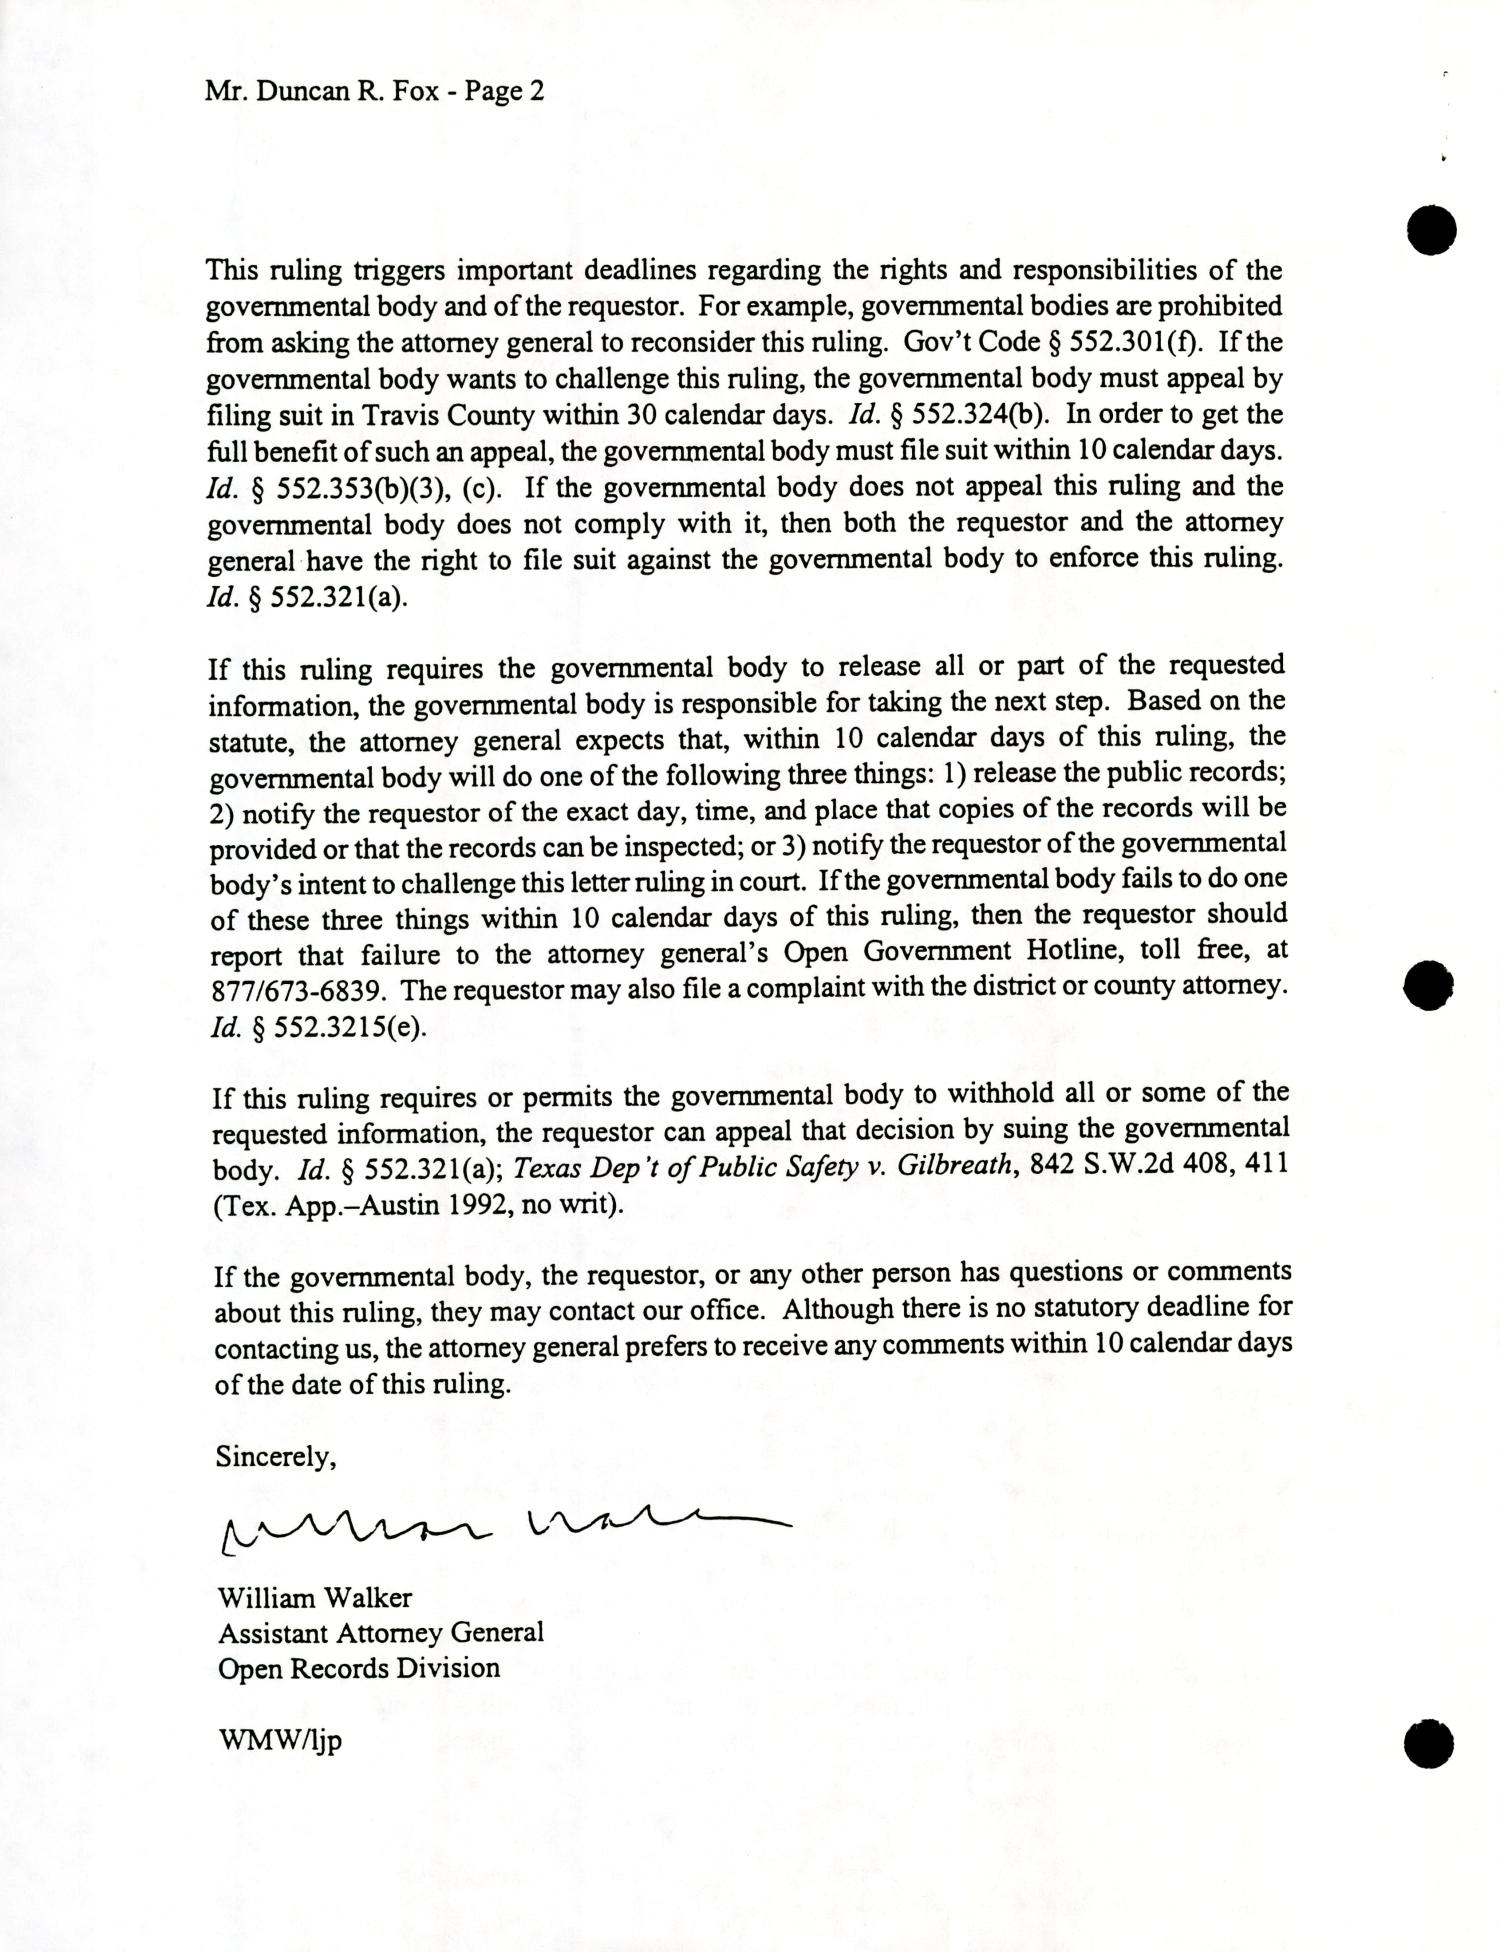 Texas Attorney General Open Records Letter Ruling: OR2000-0374
                                                
                                                    Page2
                                                